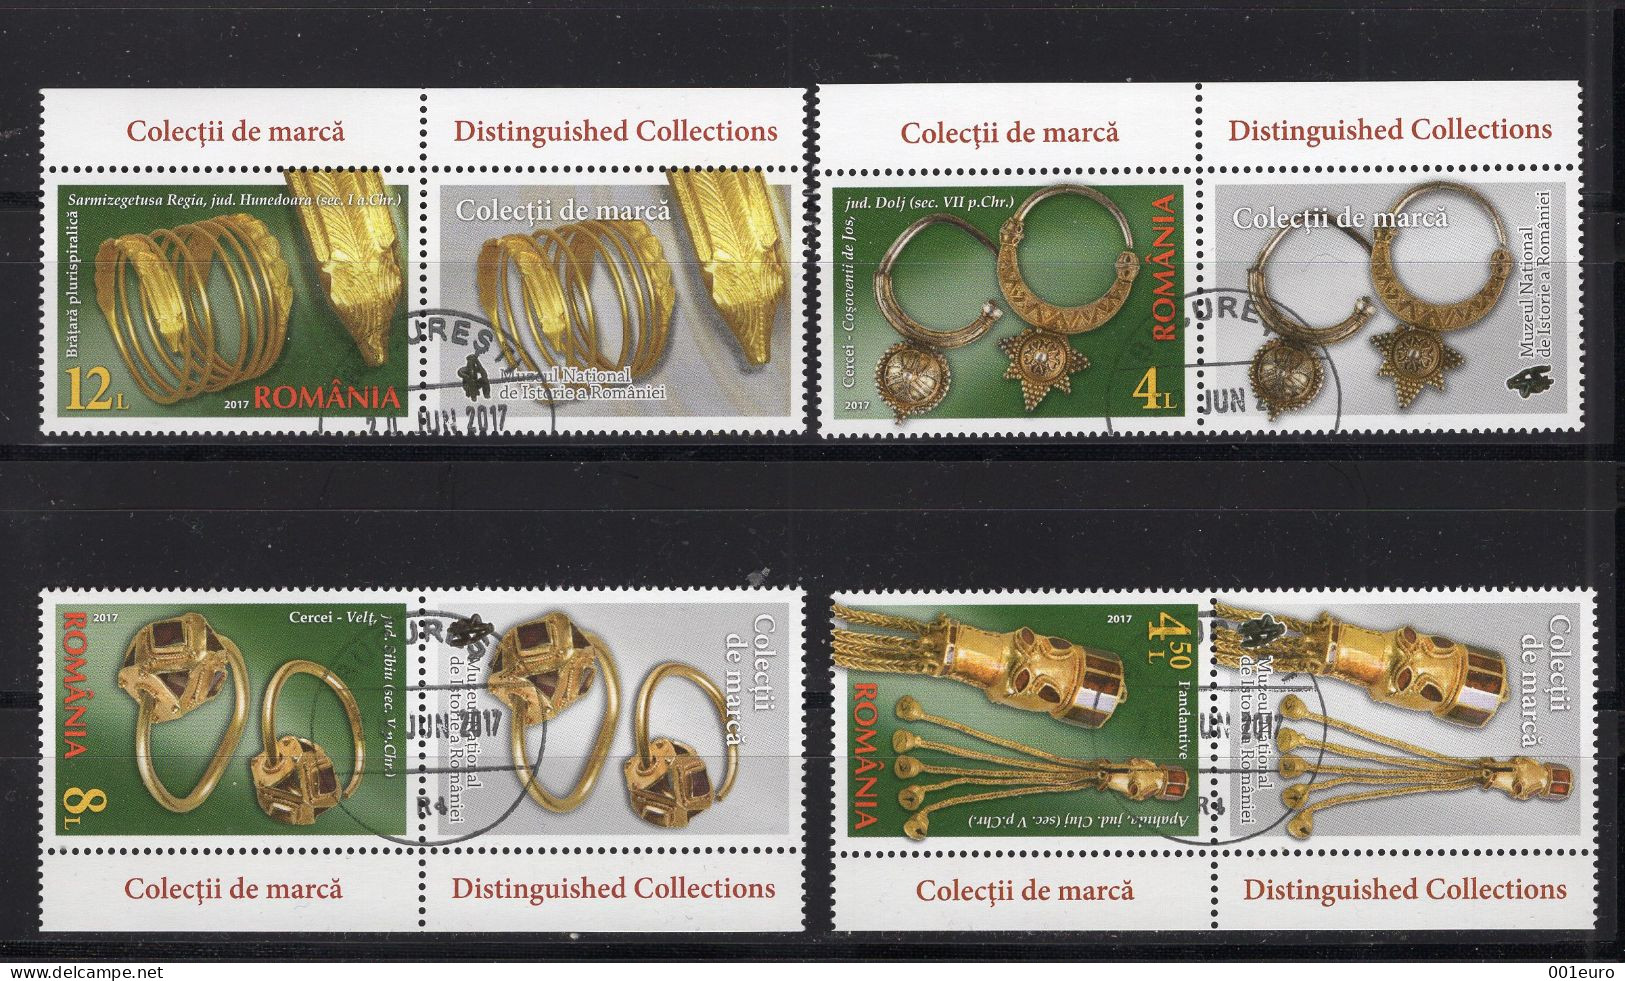 ROMANIA 2017: DISTINGUISHED COLLECTIONS, Set Of 4 Used Stamps + Vignettes - Registered Shipping! - Oblitérés